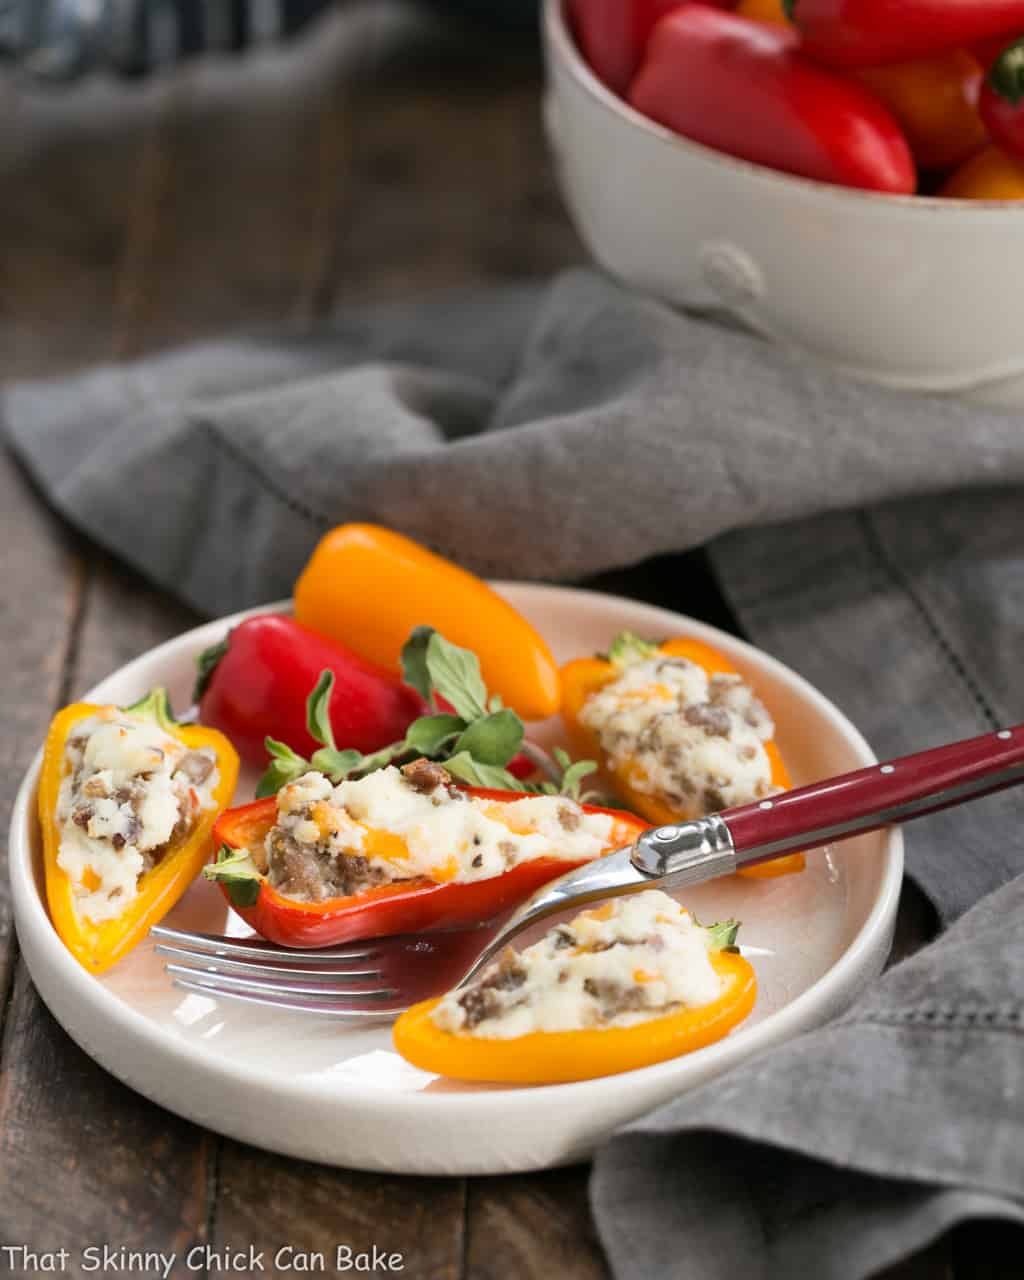 Cream Cheese Stuffed Mini Peppers with Sausage on a round white plate with a red handled fork.